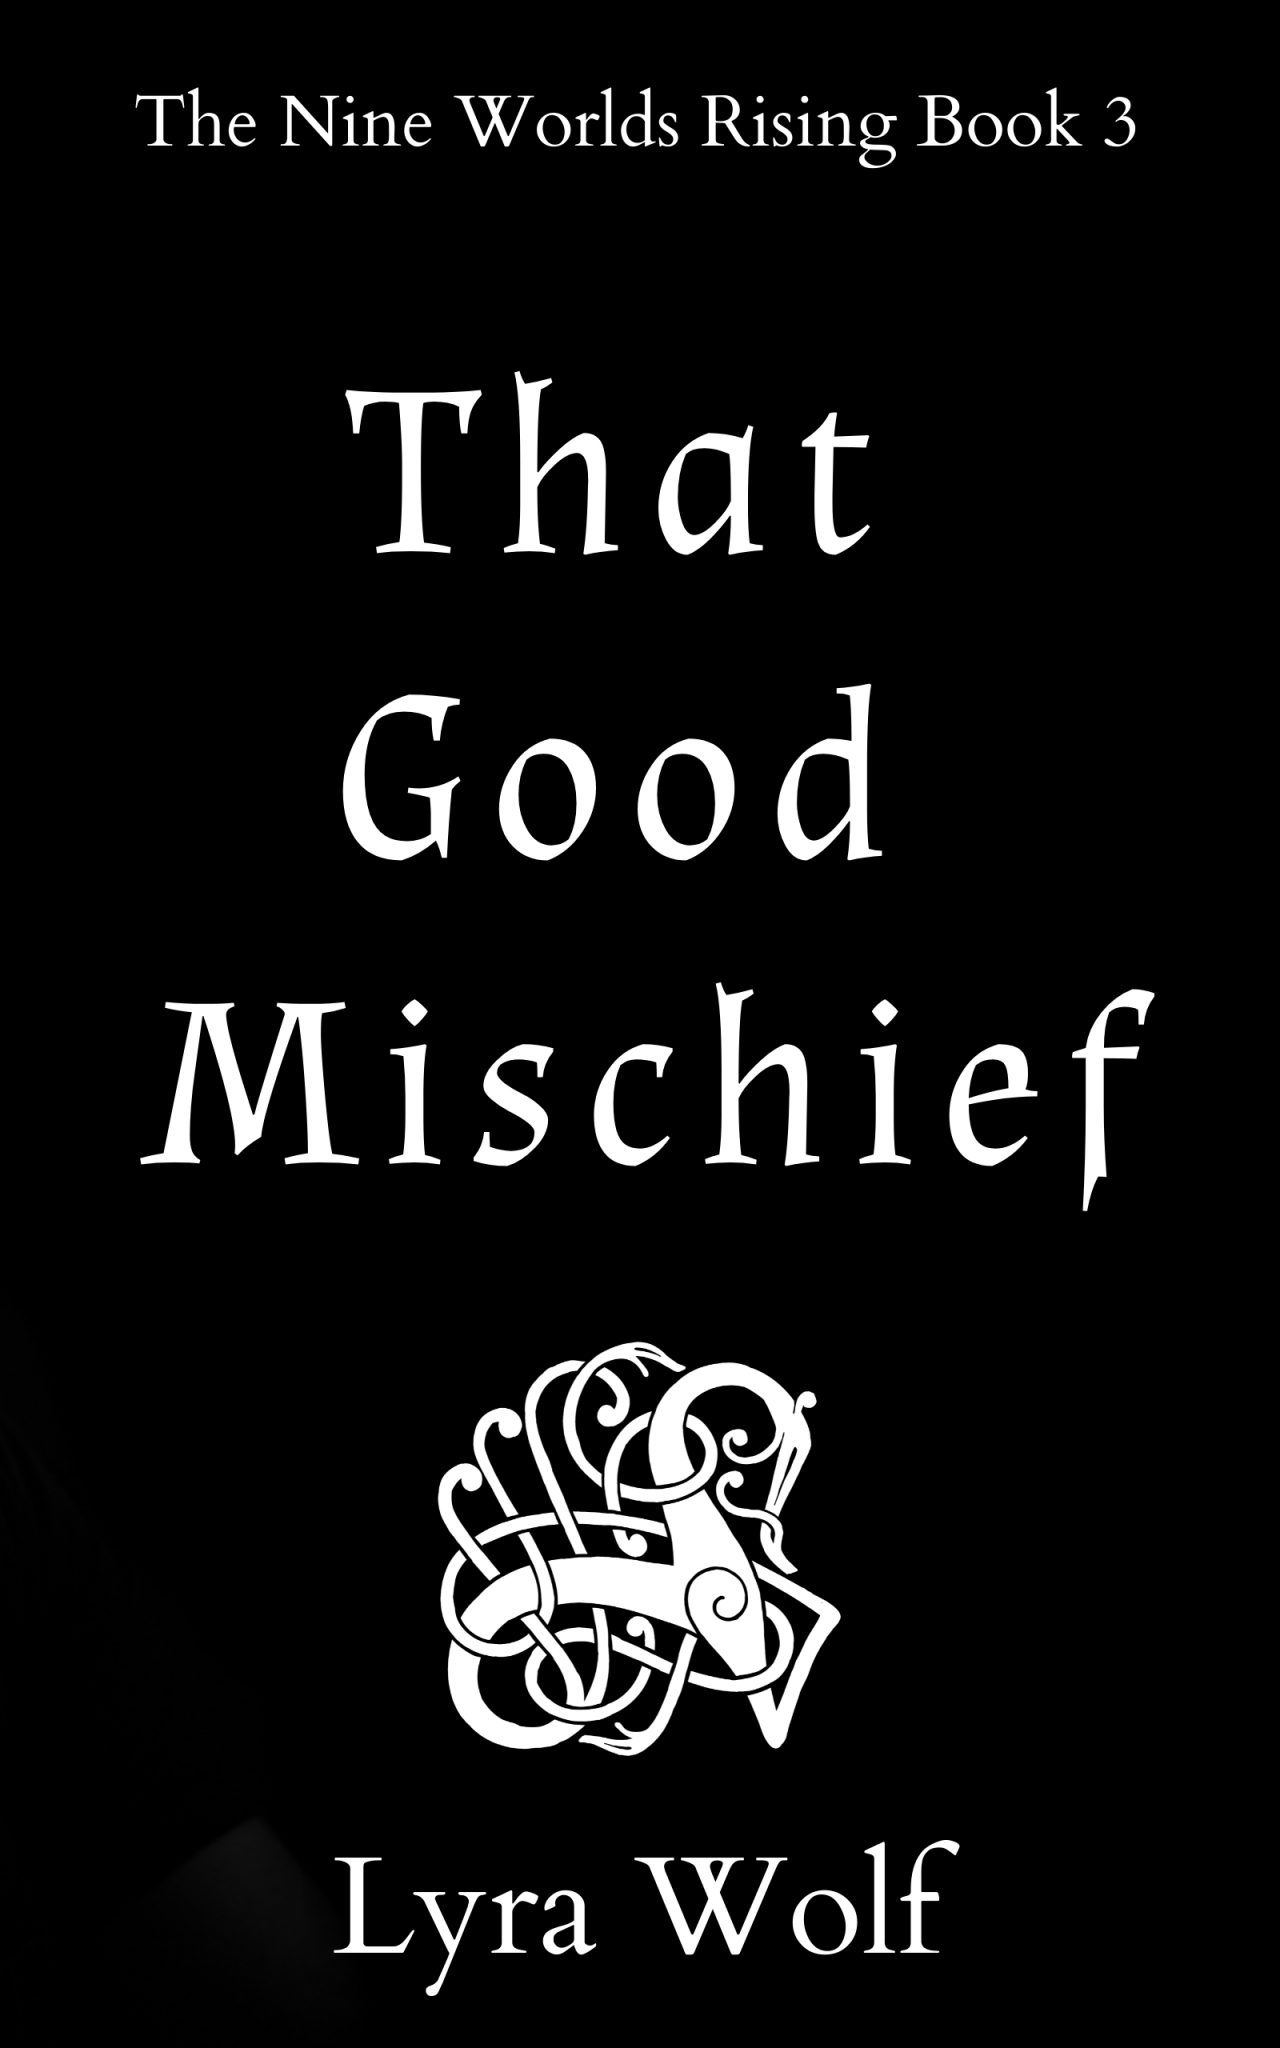 That Good Mischief by Lyra Wolf (cover to come)